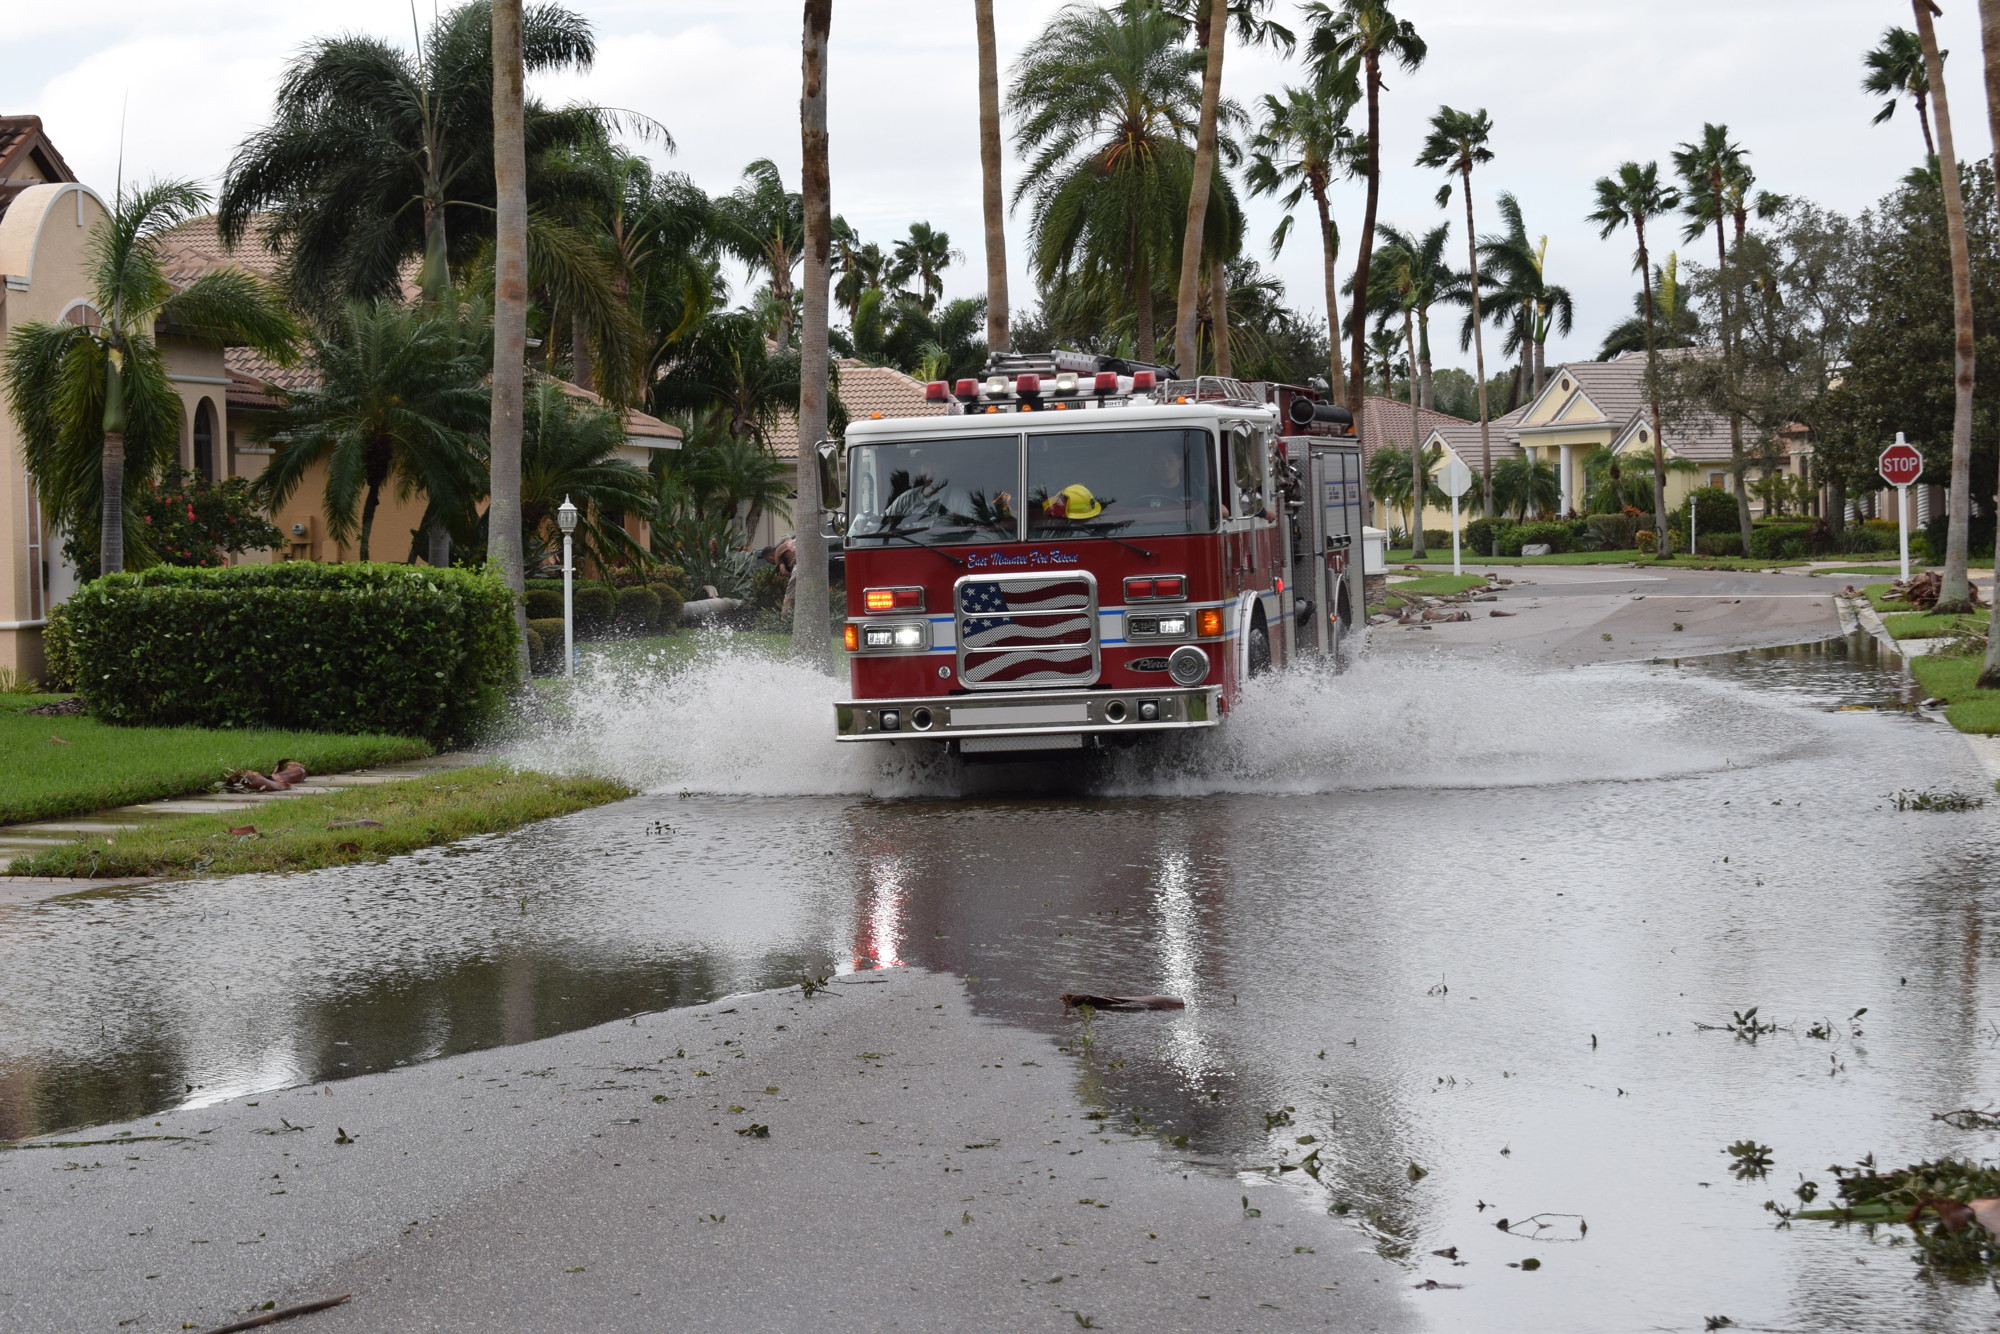 An East Manatee Fire Rescue truck goes through a flooded spot on The Masters Avenue in the Country Club. (Photo by Jay Heater)